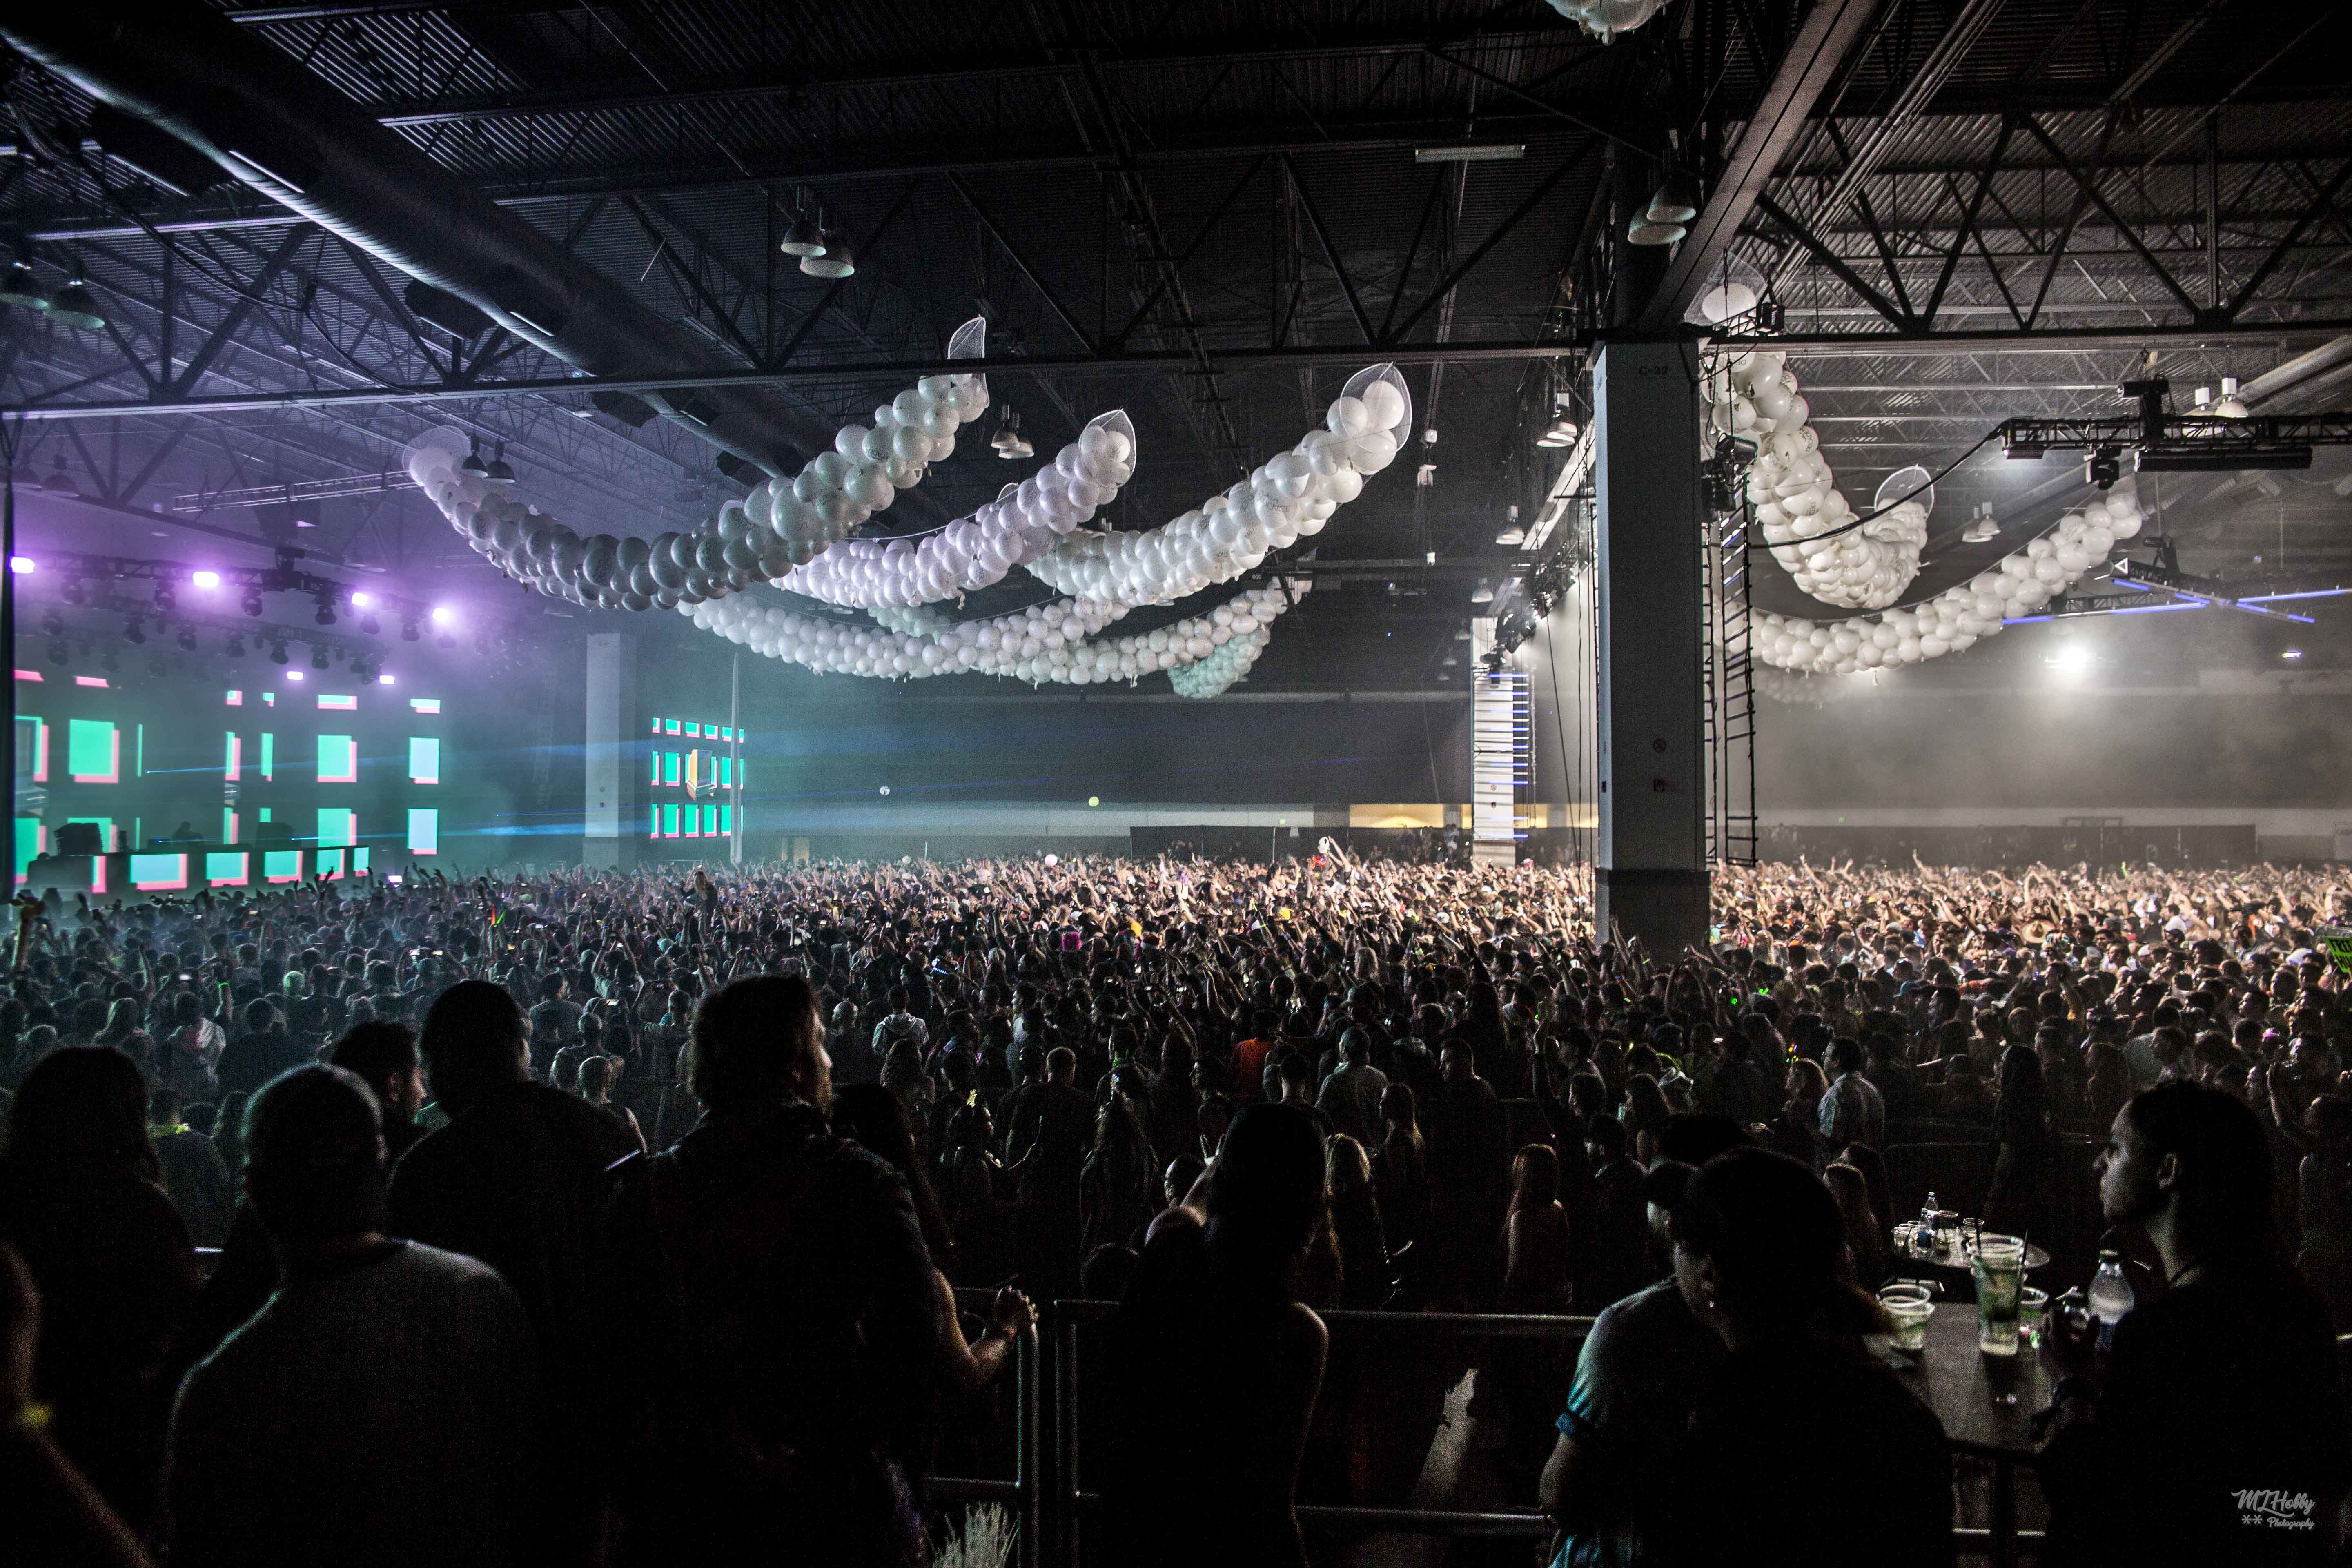 Decadence NYE Denver The CIty of Tomorrow rings in the New Year